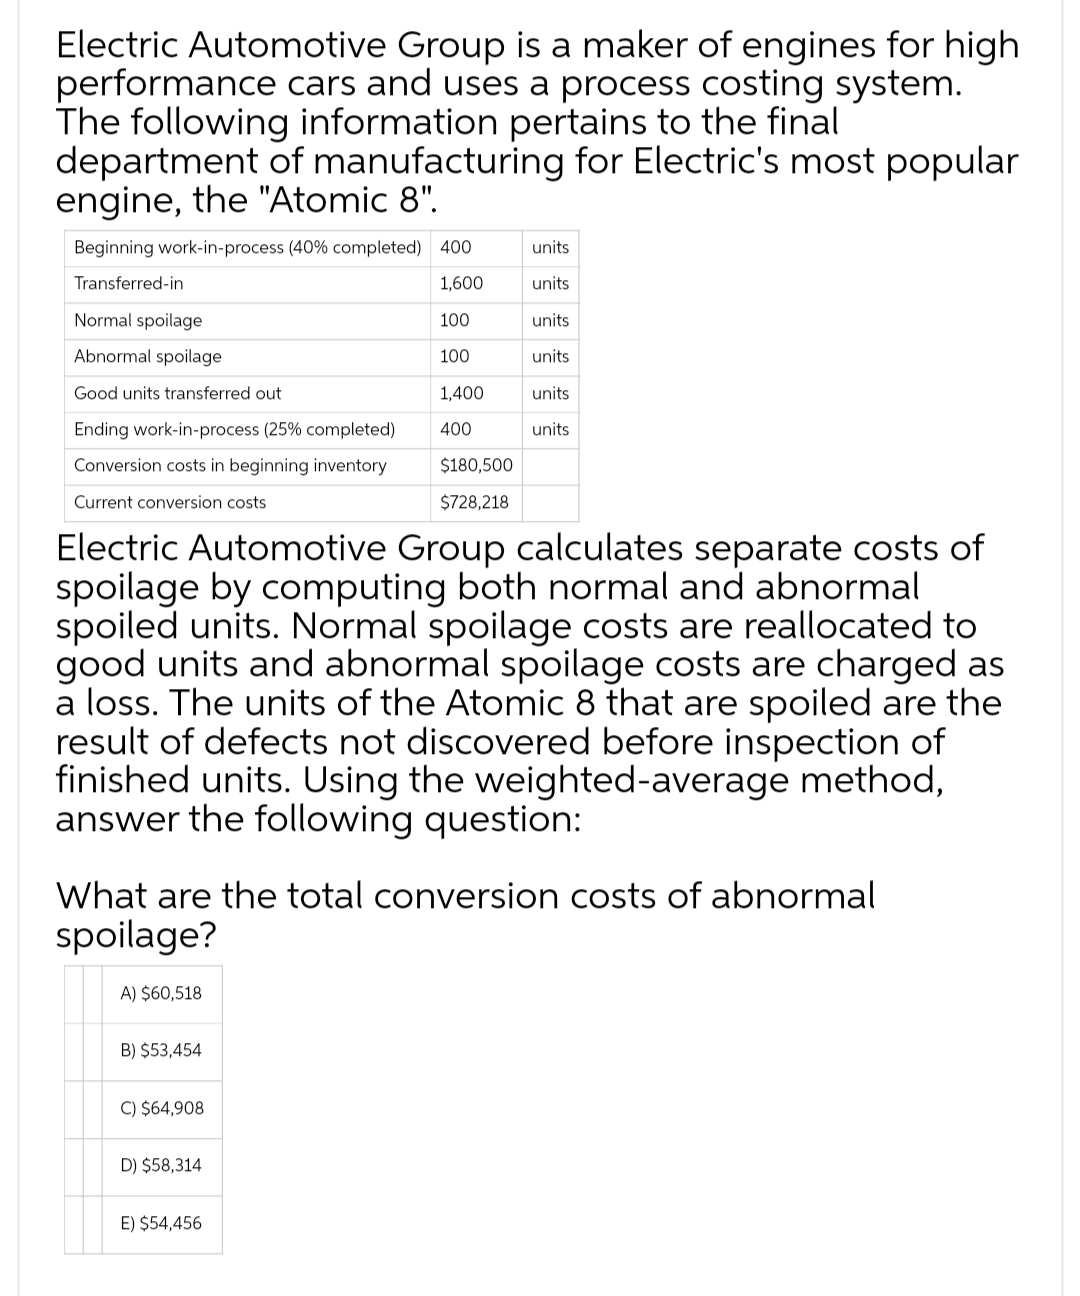 Electric Automotive Group is a maker of engines for high
performance cars and uses a process costing system.
The following information pertains to the final
department of manufacturing for Electric's most popular
engine, the "Atomic 8".
Beginning work-in-process (40% completed) 400
Transferred-in
1,600
100
100
1,400
400
Normal spoilage
Abnormal spoilage
Good units transferred out
Ending work-in-process (25% completed)
Conversion costs in beginning inventory
Current conversion costs
A) $60,518
B) $53,454
C) $64,908
$180,500
$728,218
Electric Automotive Group calculates separate costs of
spoilage by computing both normal and abnormal
spoiled units. Normal spoilage costs are reallocated to
good units and abnormal spoilage costs are charged as
a loss. The units of the Atomic 8 that are spoiled are the
result of defects not discovered before inspection of
finished units. Using the weighted-average method,
answer the following question:
D) $58,314
units
units
What are the total conversion costs of abnormal
spoilage?
E) $54,456
units
units
units
units